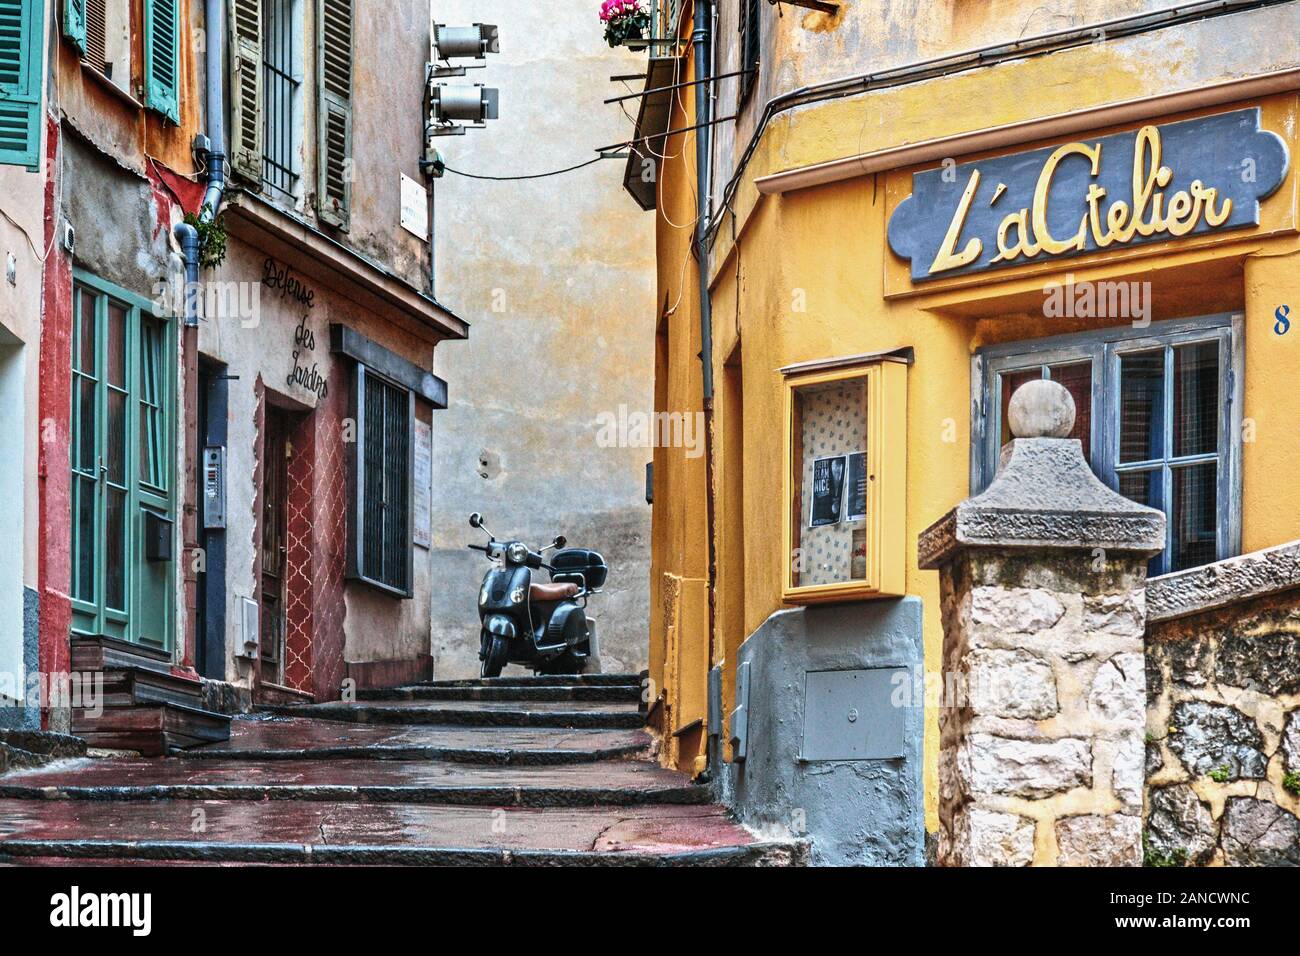 Scooter standing at top of steps in a colorful pedestrian street in Nice, France, Europe Stock Photo